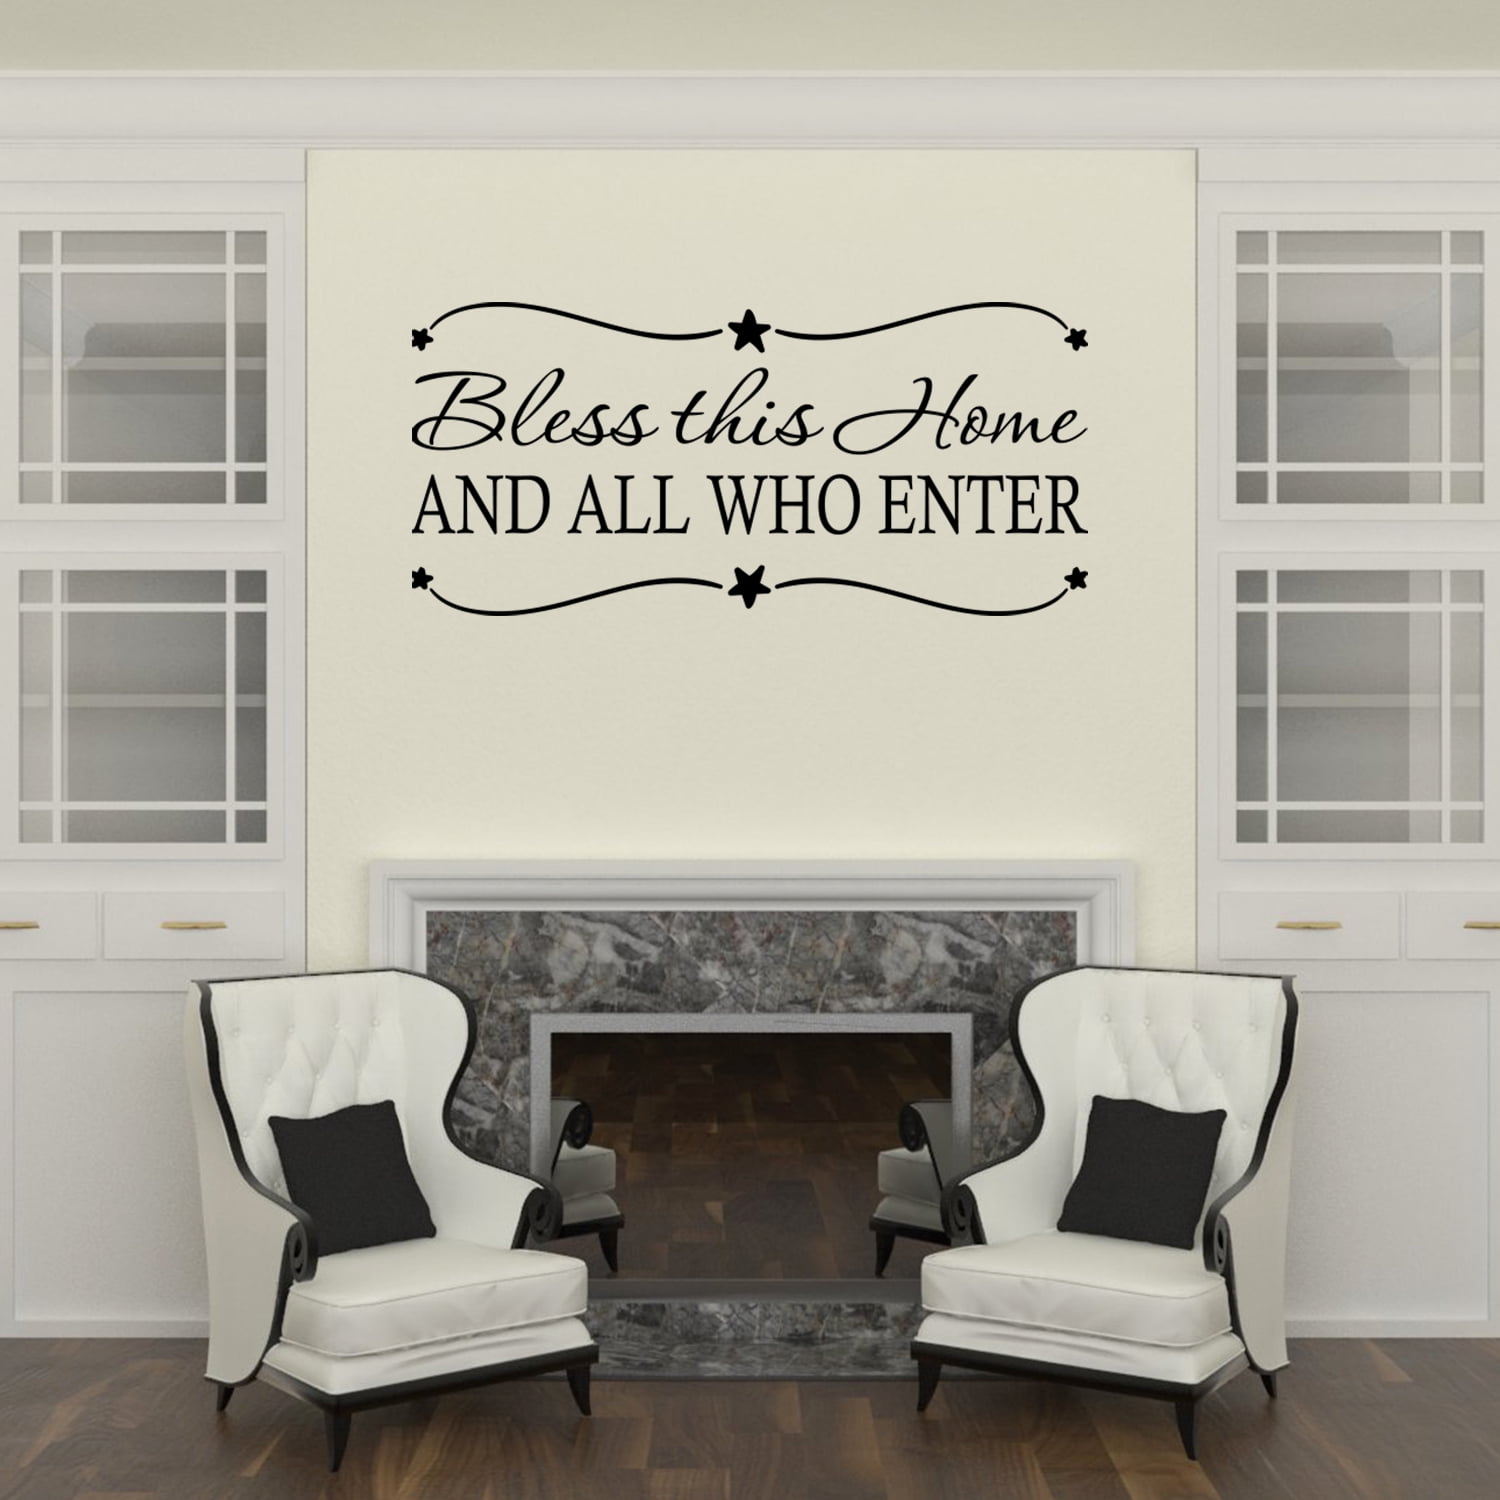 Bless This Home with Love and Laughter Wall Decals Stickers Vinyl Wall Quotes Peel and Stick Home Saying Living Room House Entryway Decor Gift